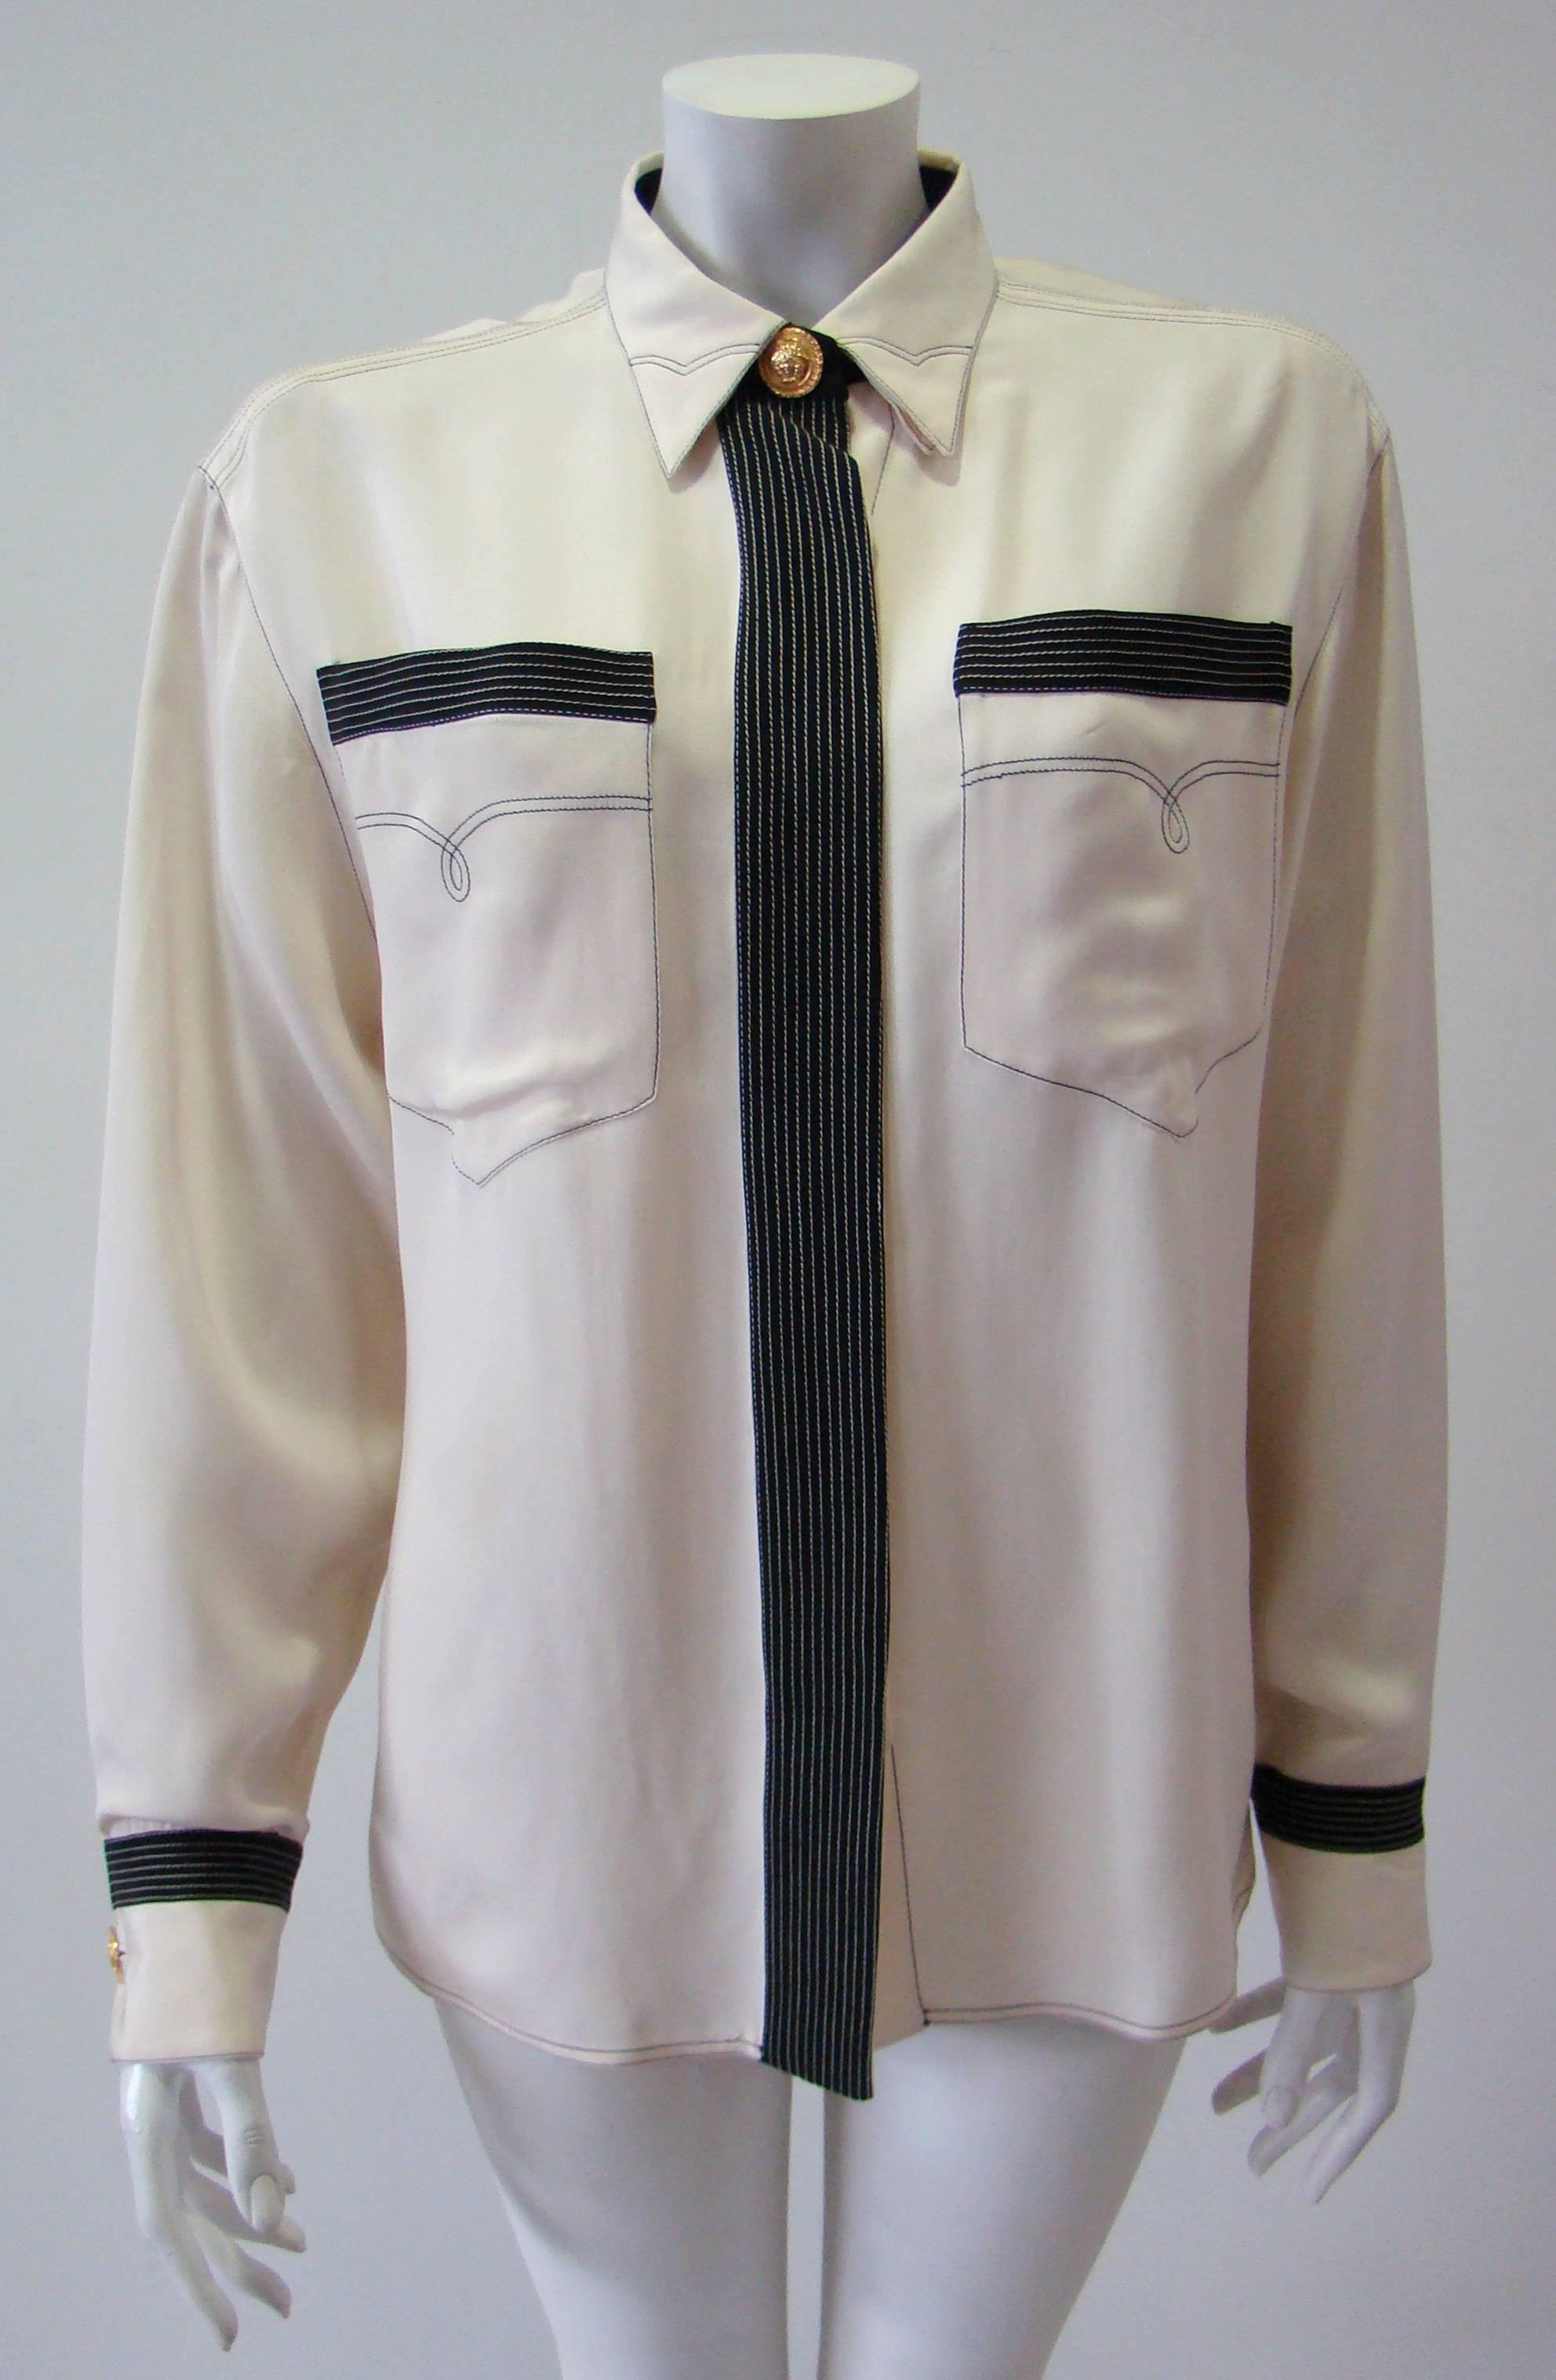 Gianni Versace Couture Creme Crepe De Chine Shirt With 3  Gold Metalic Buttons On The Collar And On The Mancettes.